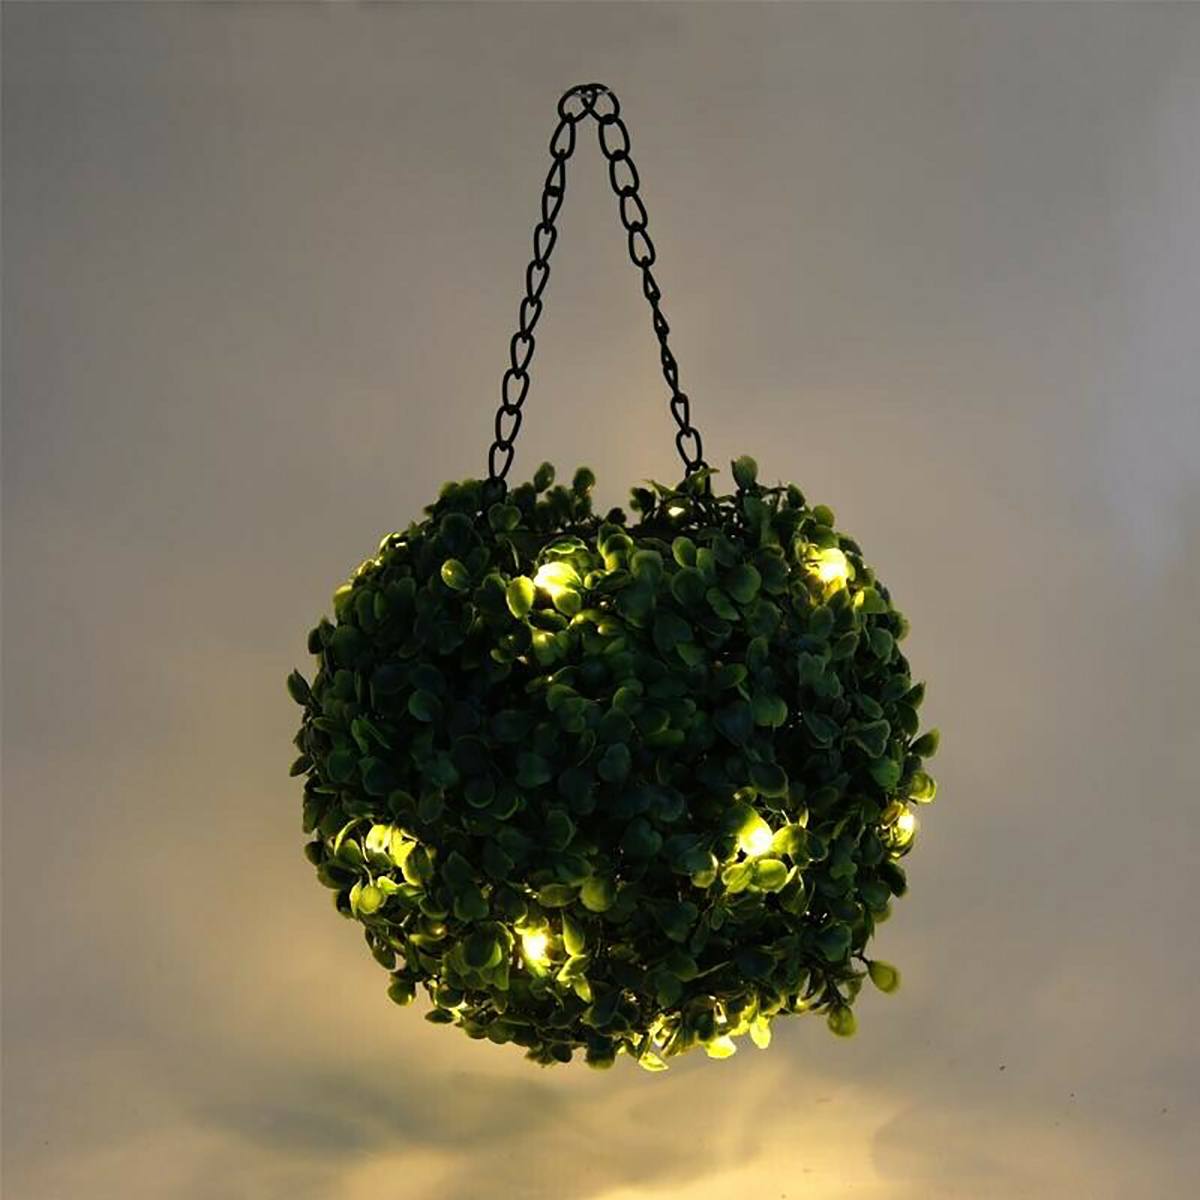 Artificial Topiary Grass Ball with Solar Lights, includes hook